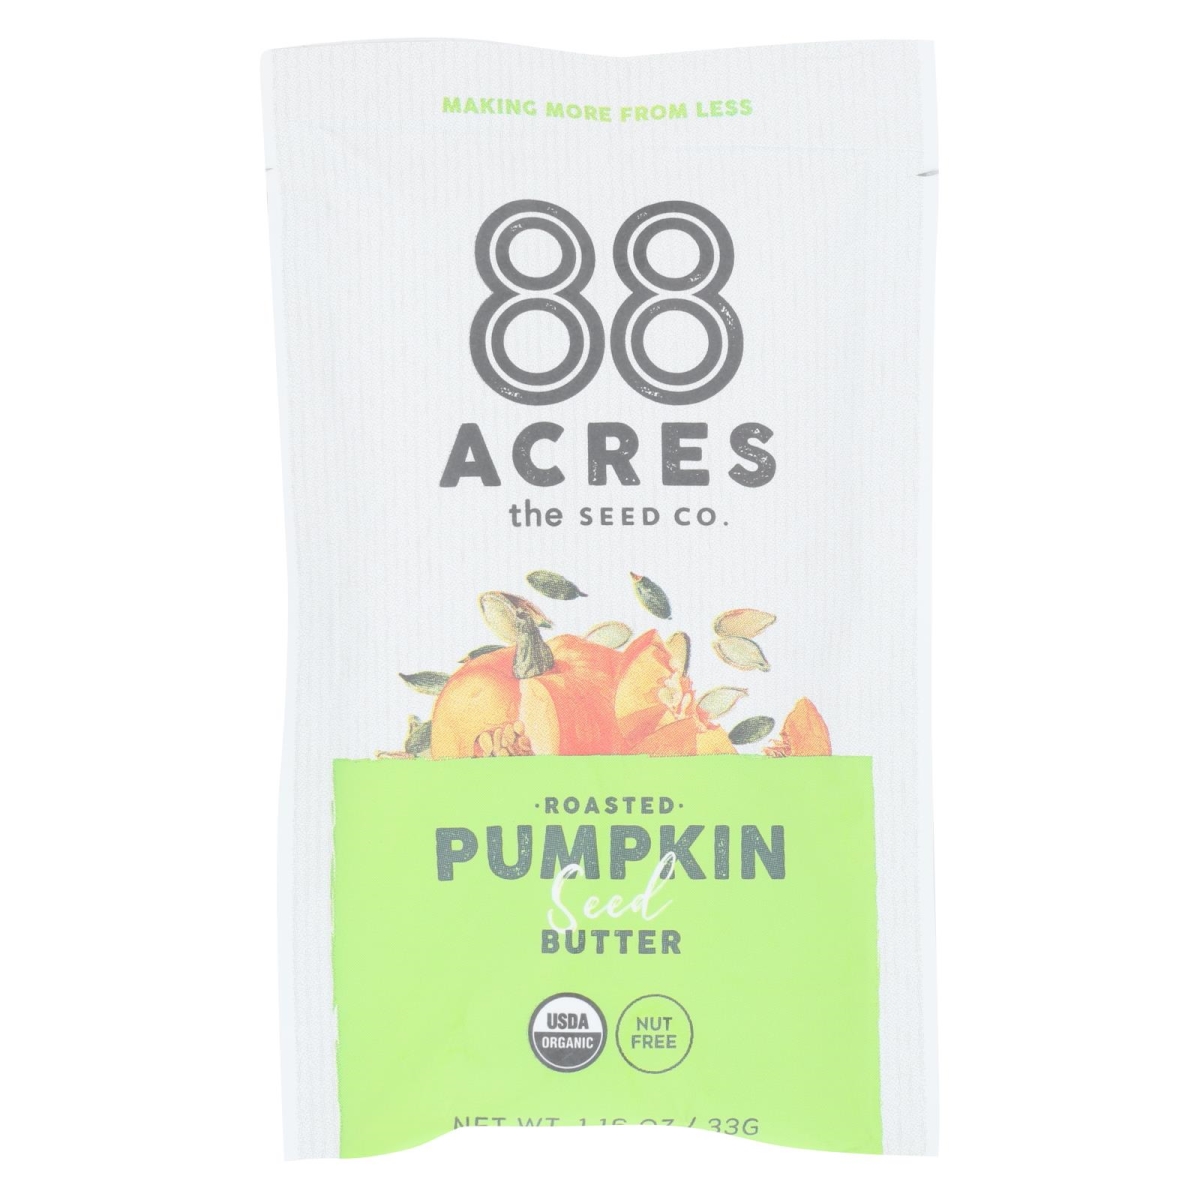 Picture of 88 Acres 2410926 1.16 oz Organic Pumpkin Seed Butter